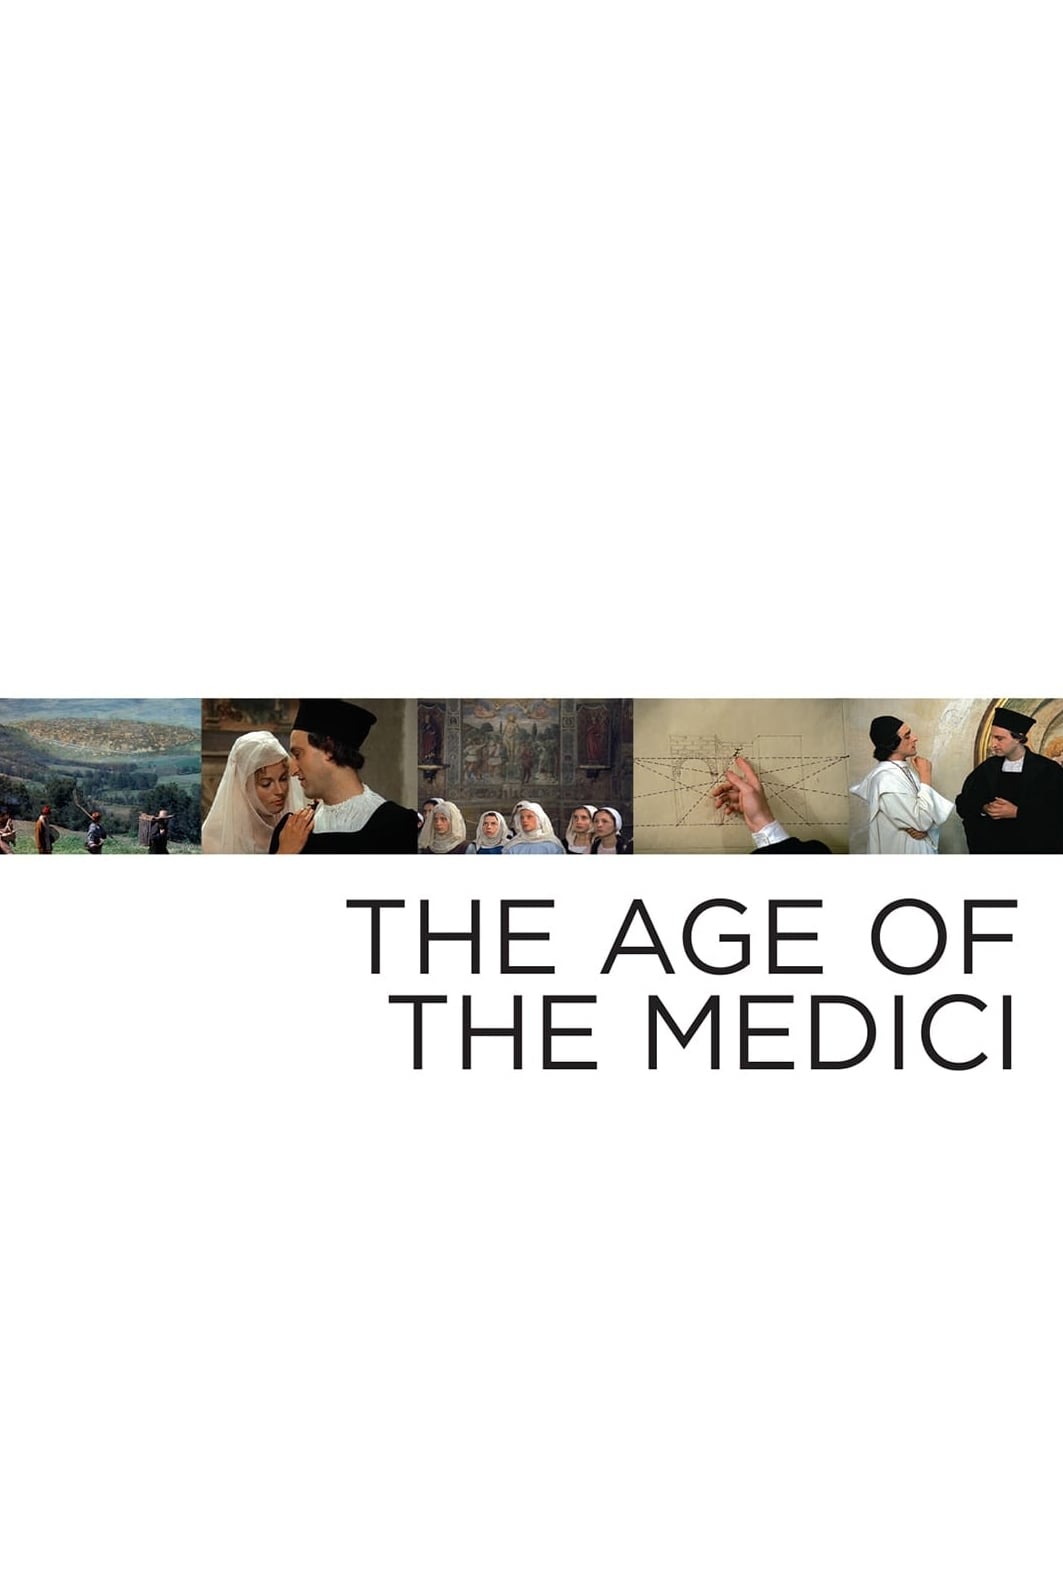 The Age of the Medici (1972)